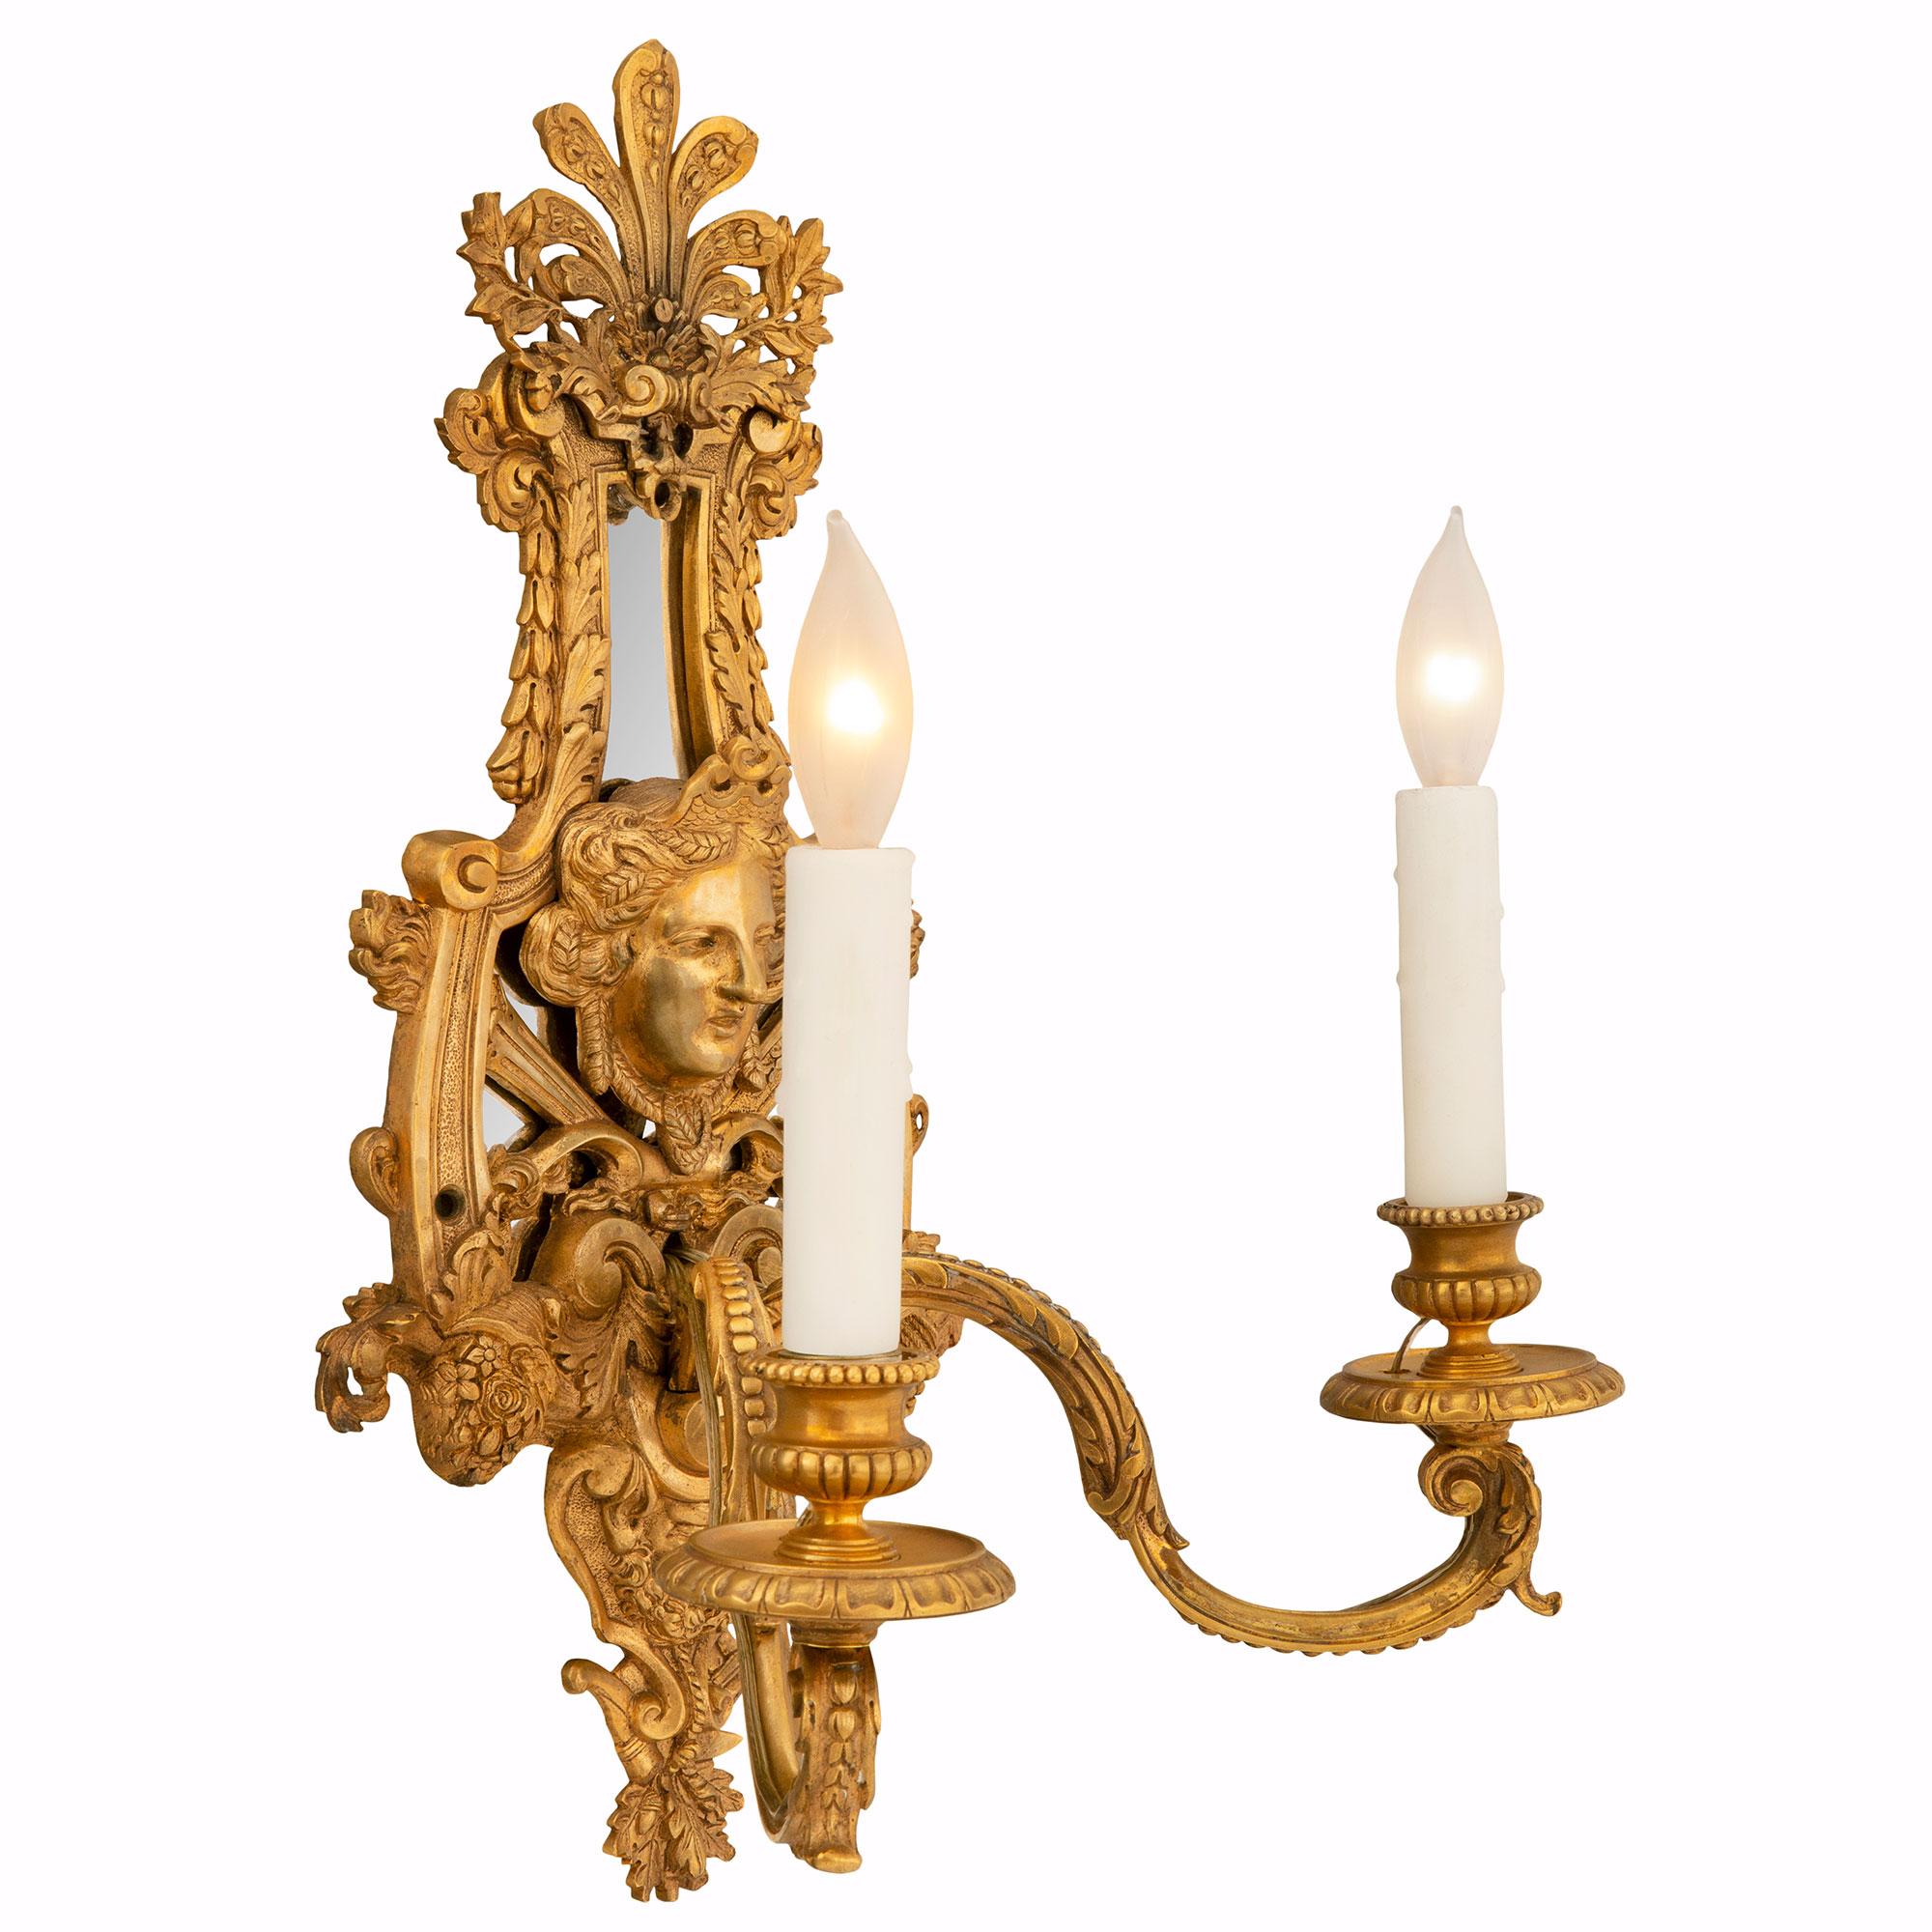 An exquisite pair of French early 19th century Louis XIV st. ormolu sconces. Each two arm sconce is centered by a striking and richly chased bottom foliate reserve with beautiful oak leaves and acorns with a pan flute and handsome bearded satyr. At